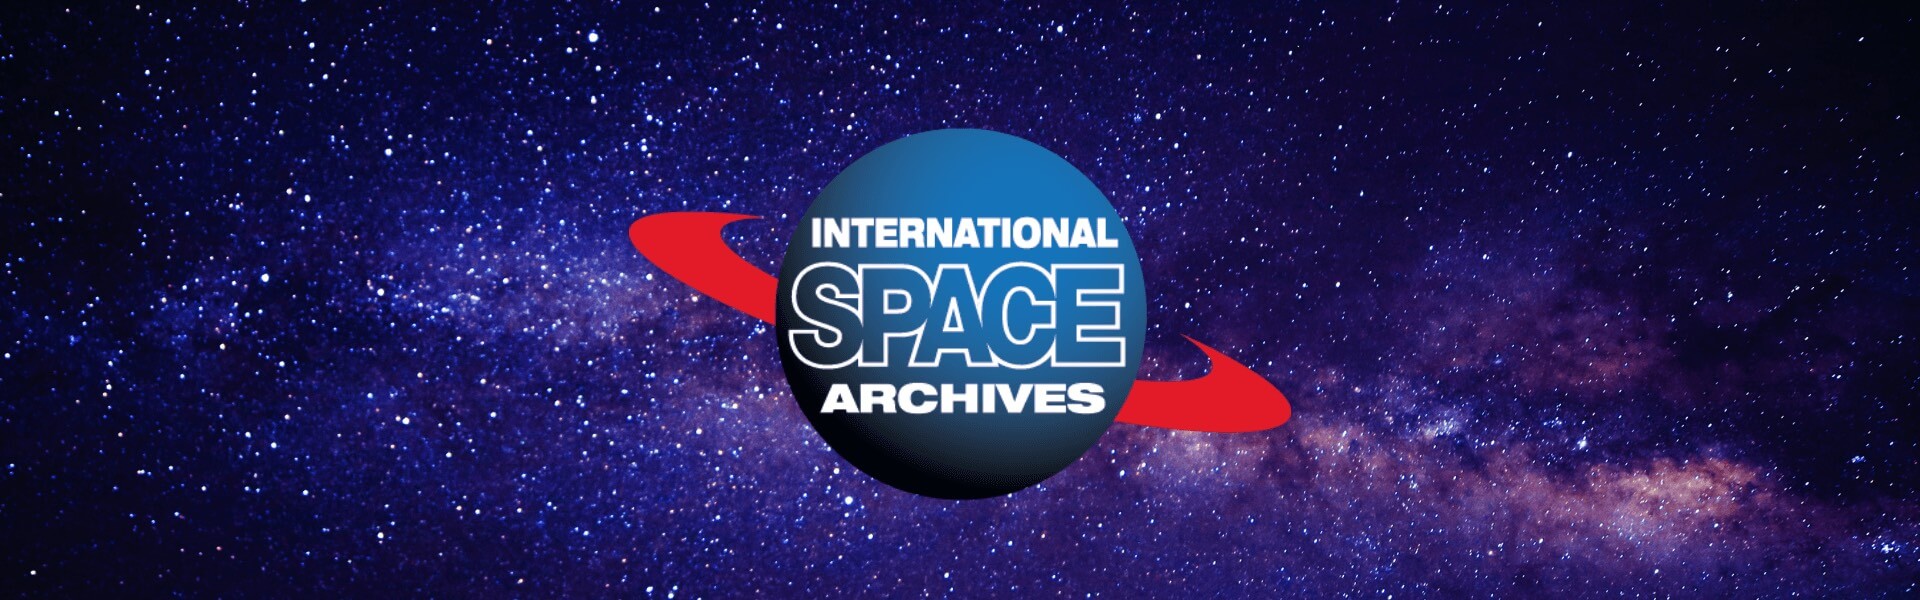 International Space Archives (ISA)